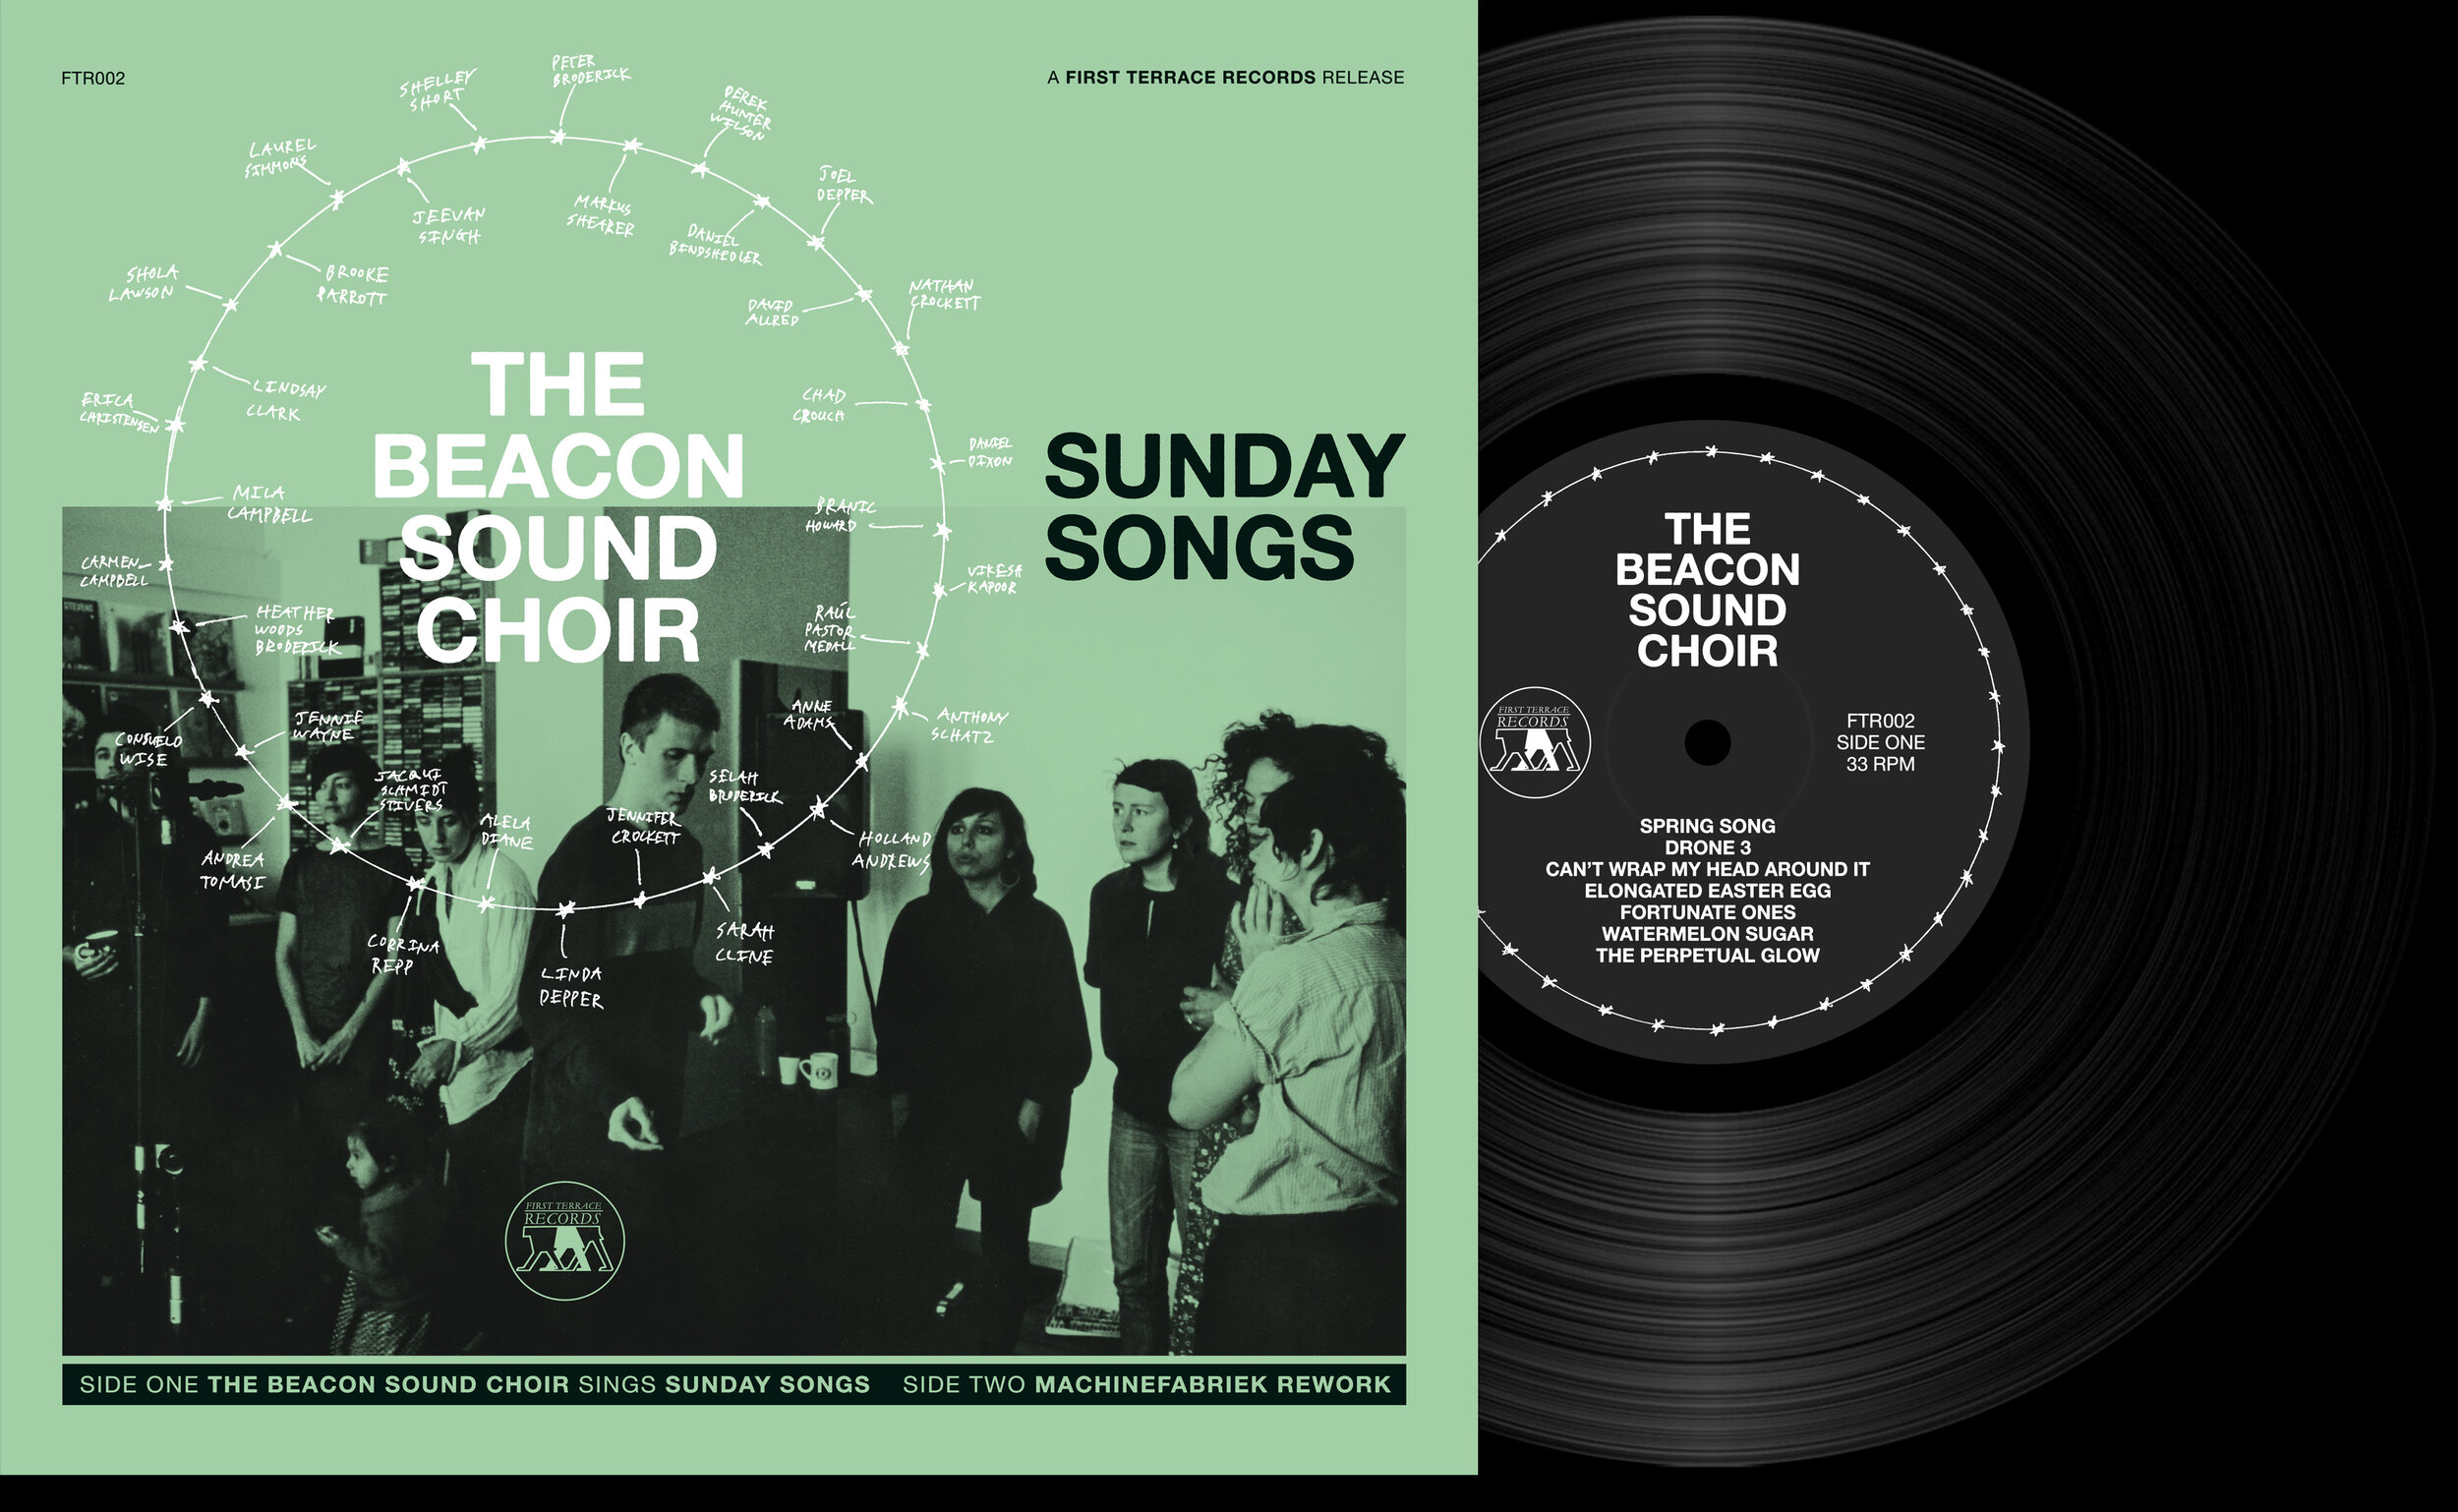  lp front cover – The Beacon Sound Choir Sunday Songs First Terrace Records, 2017 